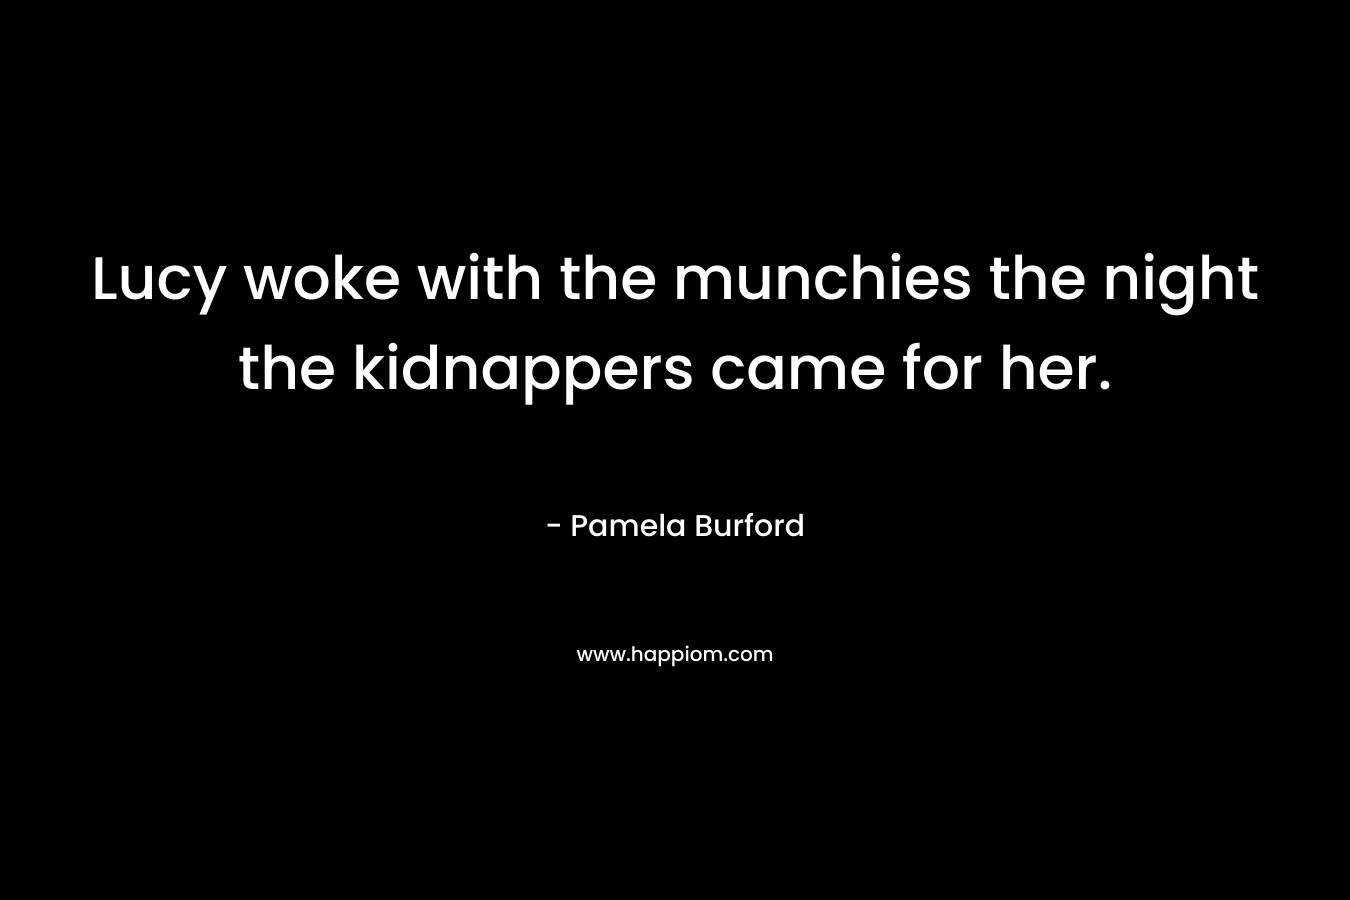 Lucy woke with the munchies the night the kidnappers came for her. – Pamela Burford